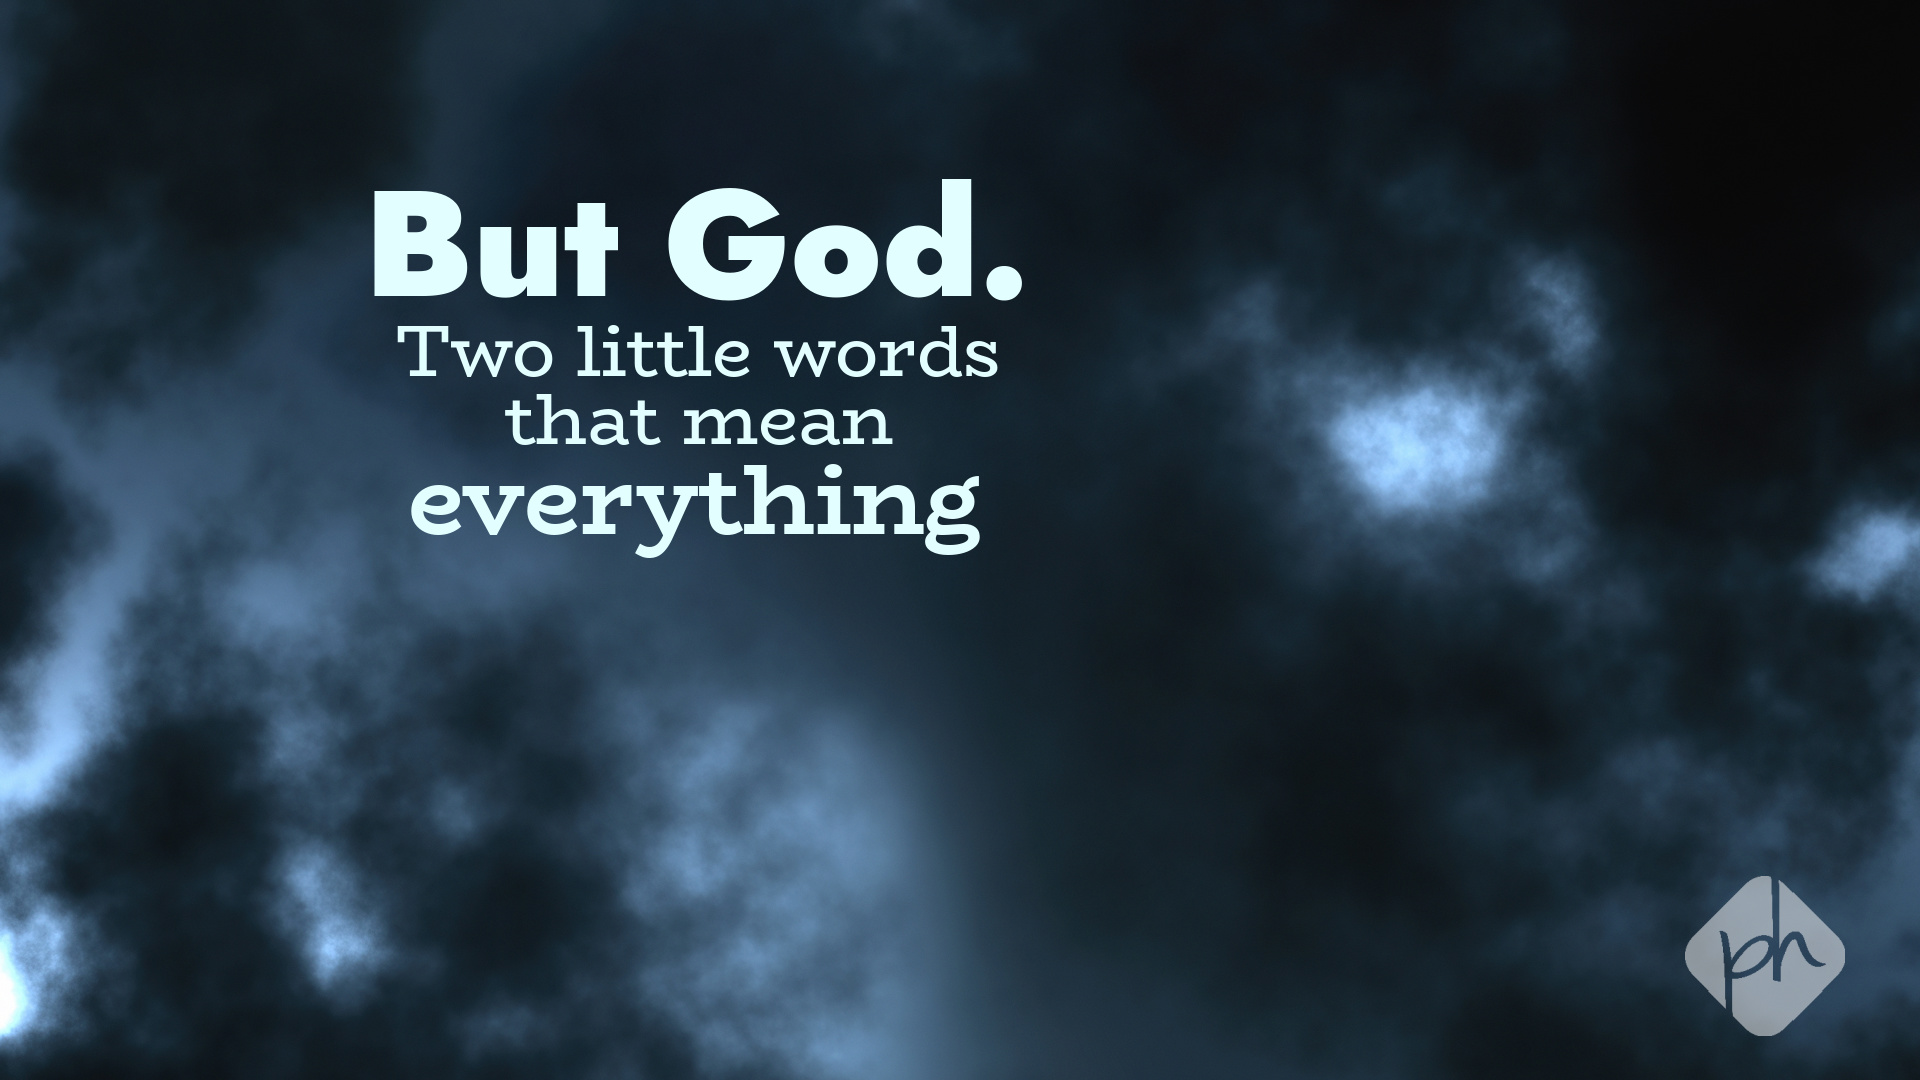 But God. Two little words that mean everything